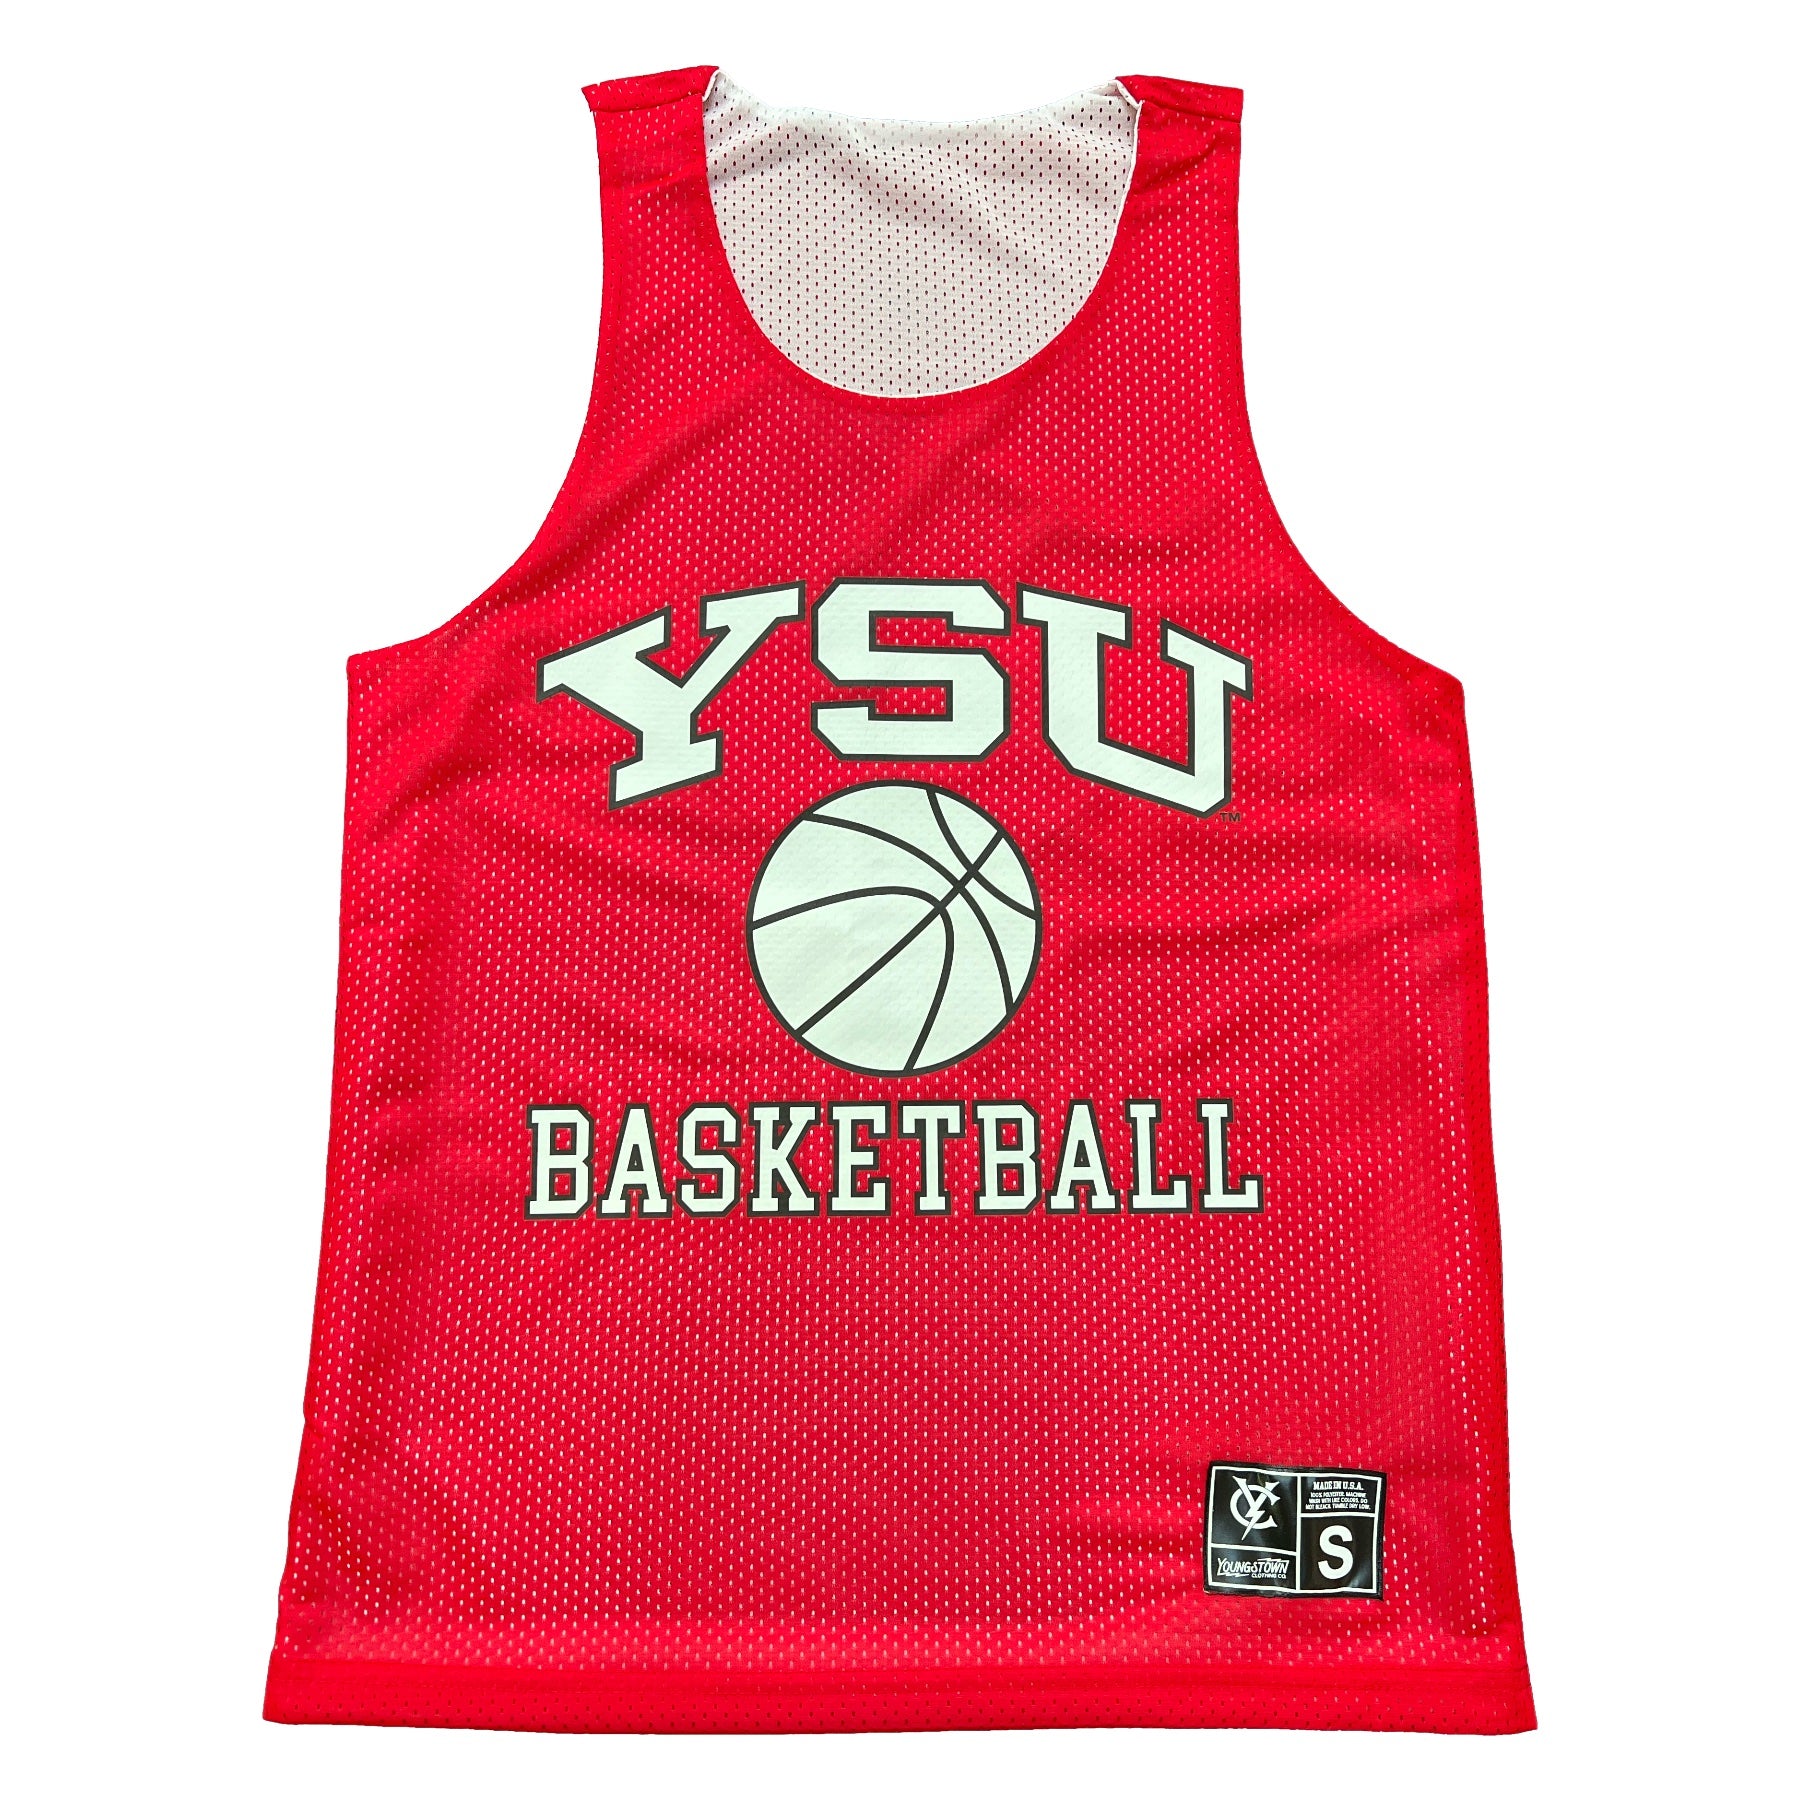 Youngstown State Reversible Basketball Jersey – Youngstown Clothing Co